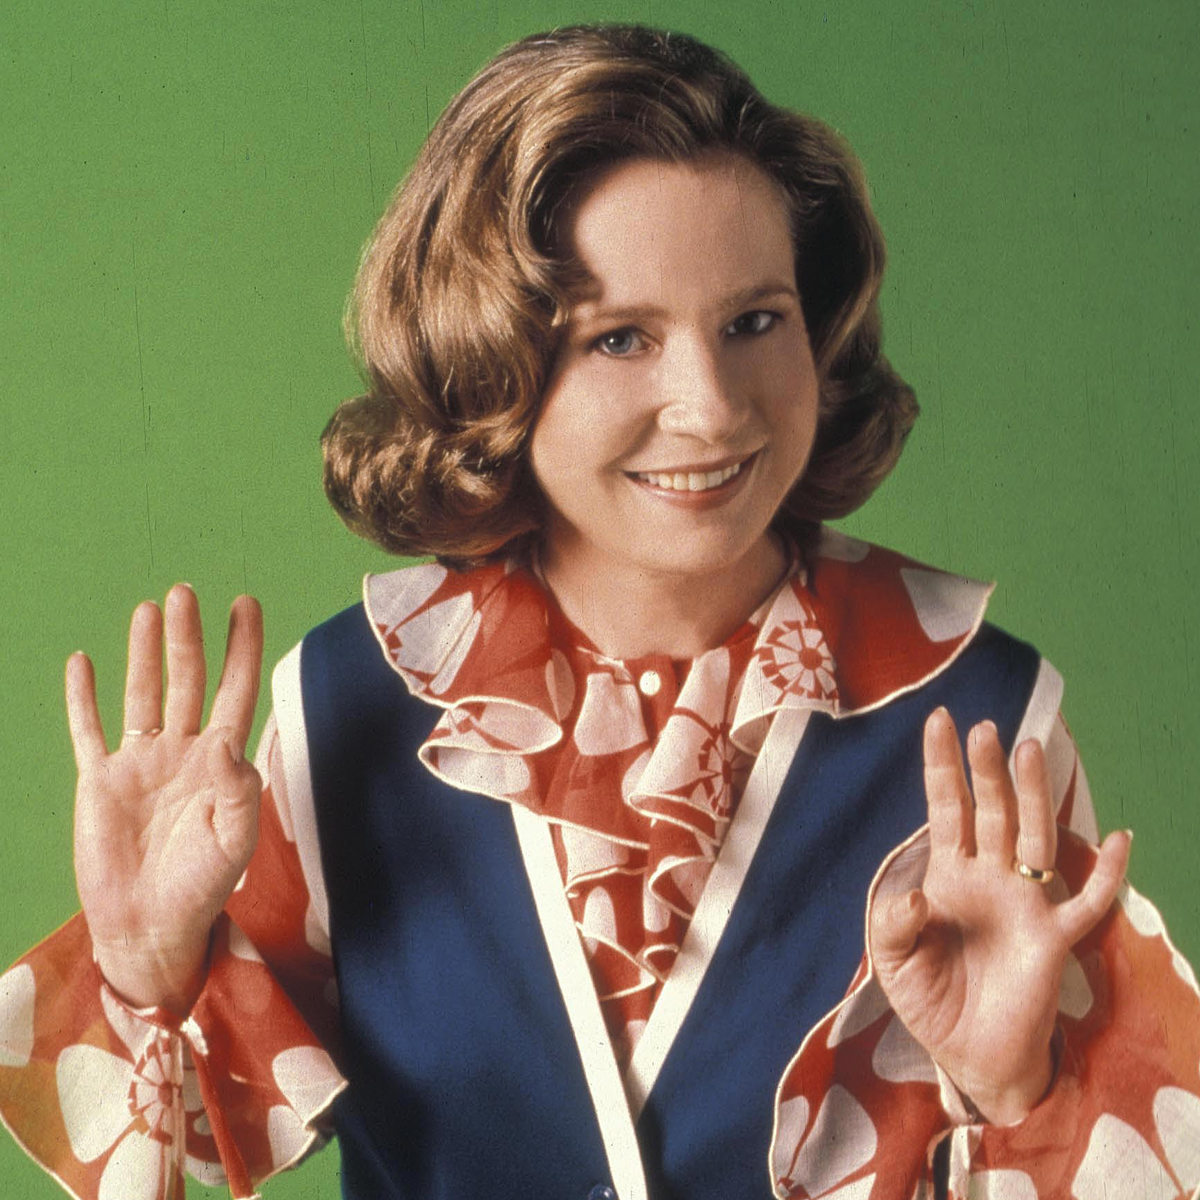 That ‘70s Show’s Debra Jo Rupp Has the Best Reaction to Reunion